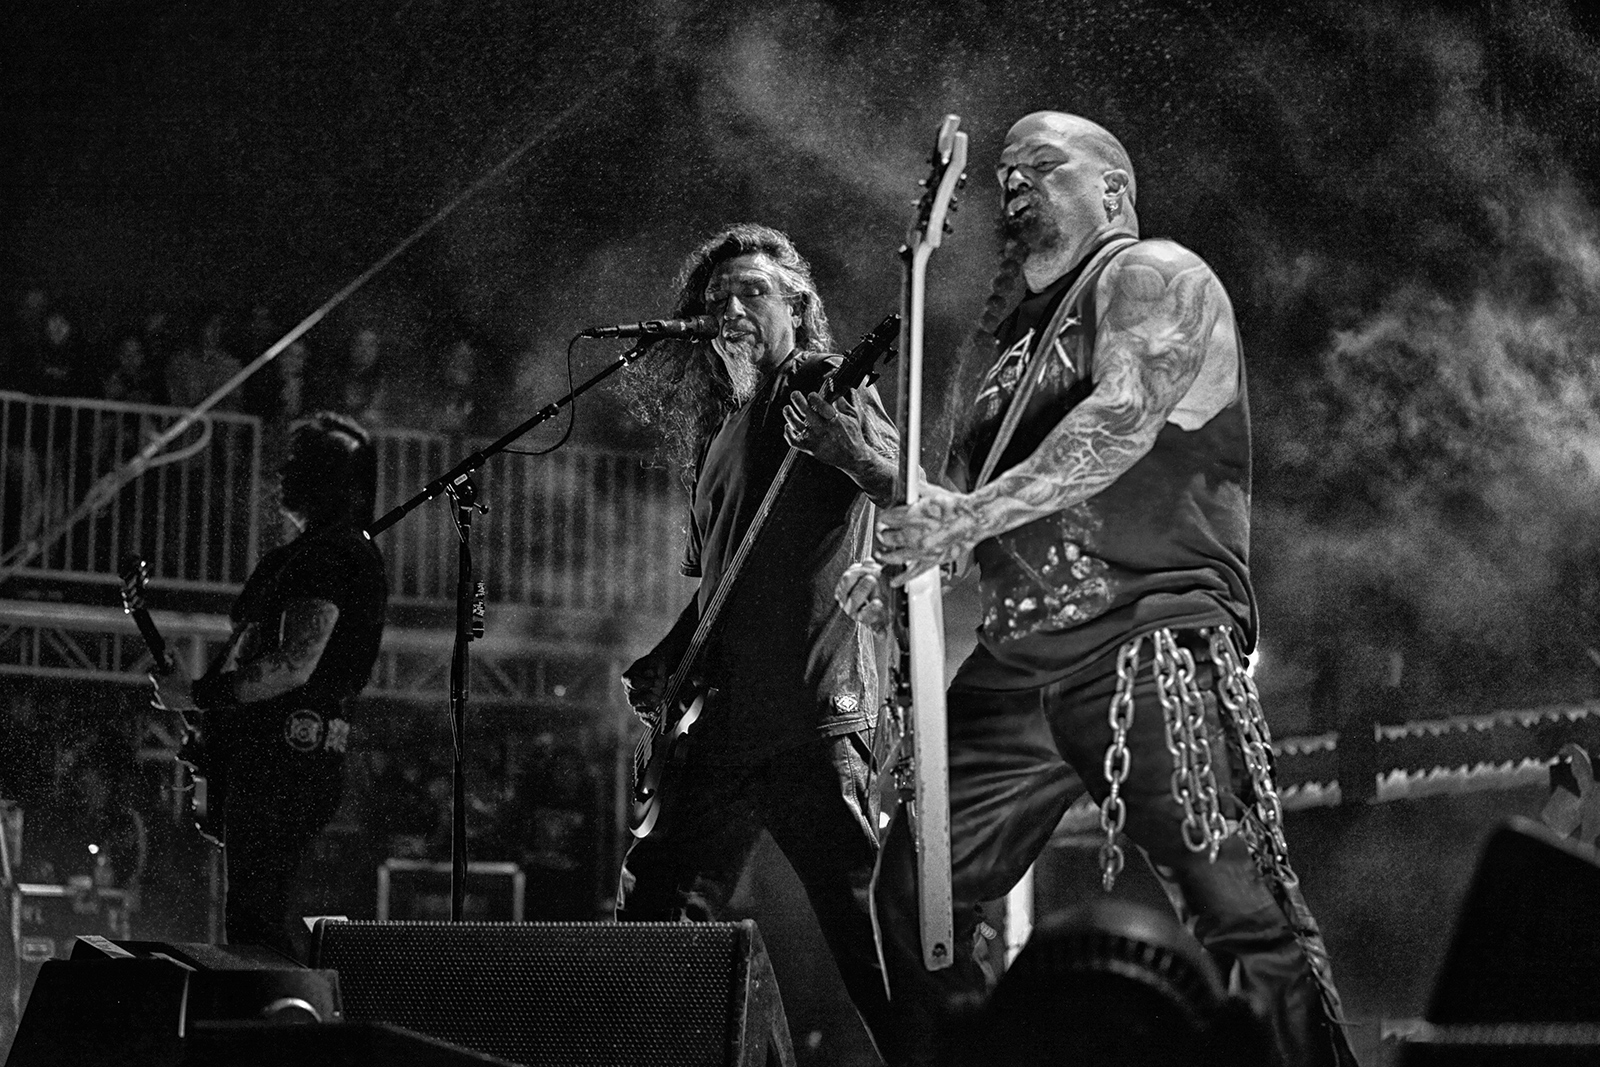 Slayer Deliver Beautiful Chaos at Start of Final Tour Revolver